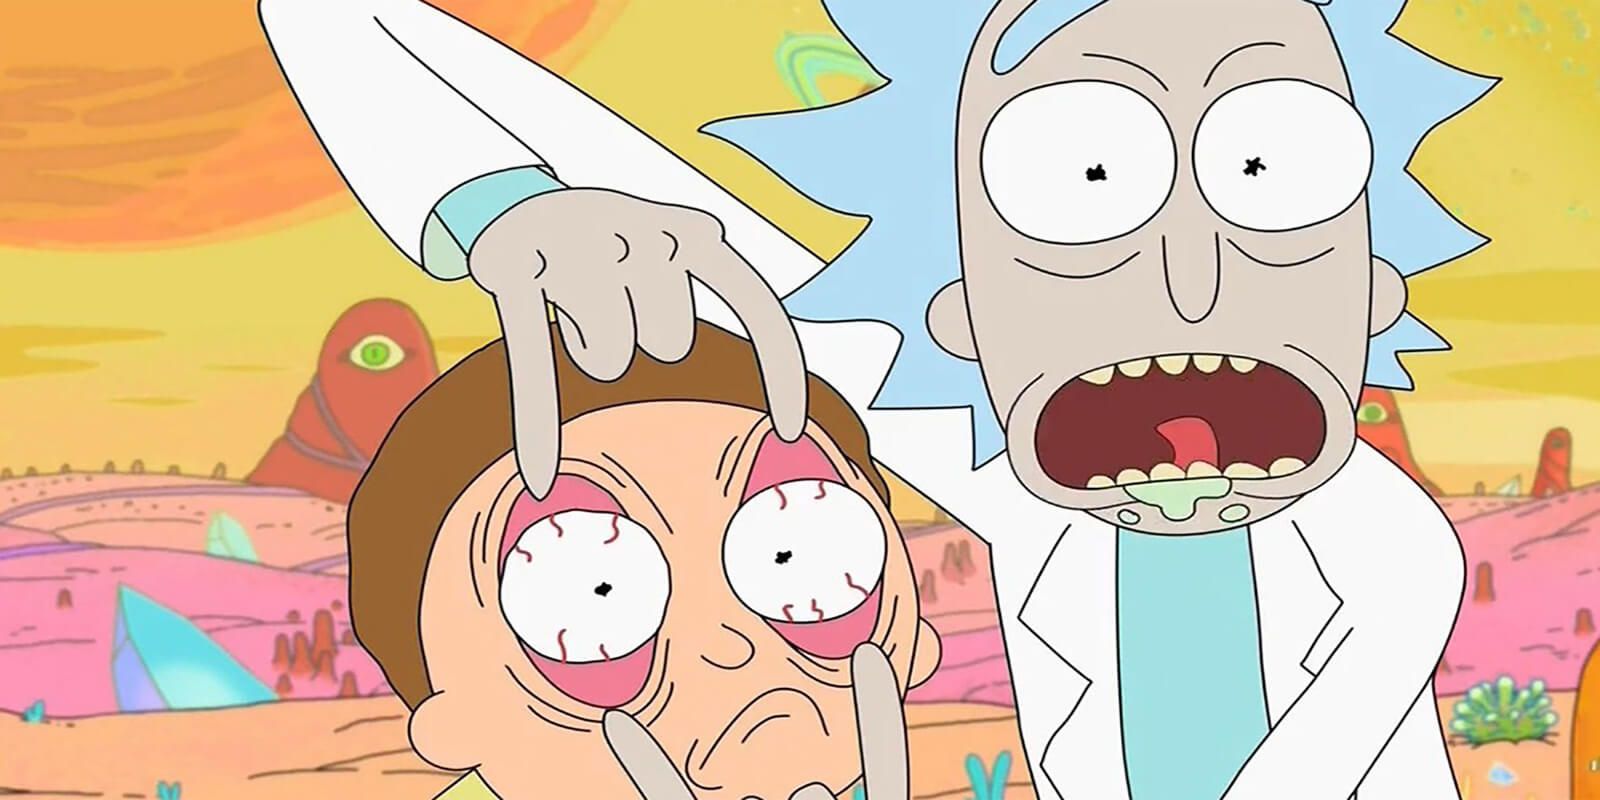 Rick and Morty Producer Weighs in on Whether a Movie Will Happen